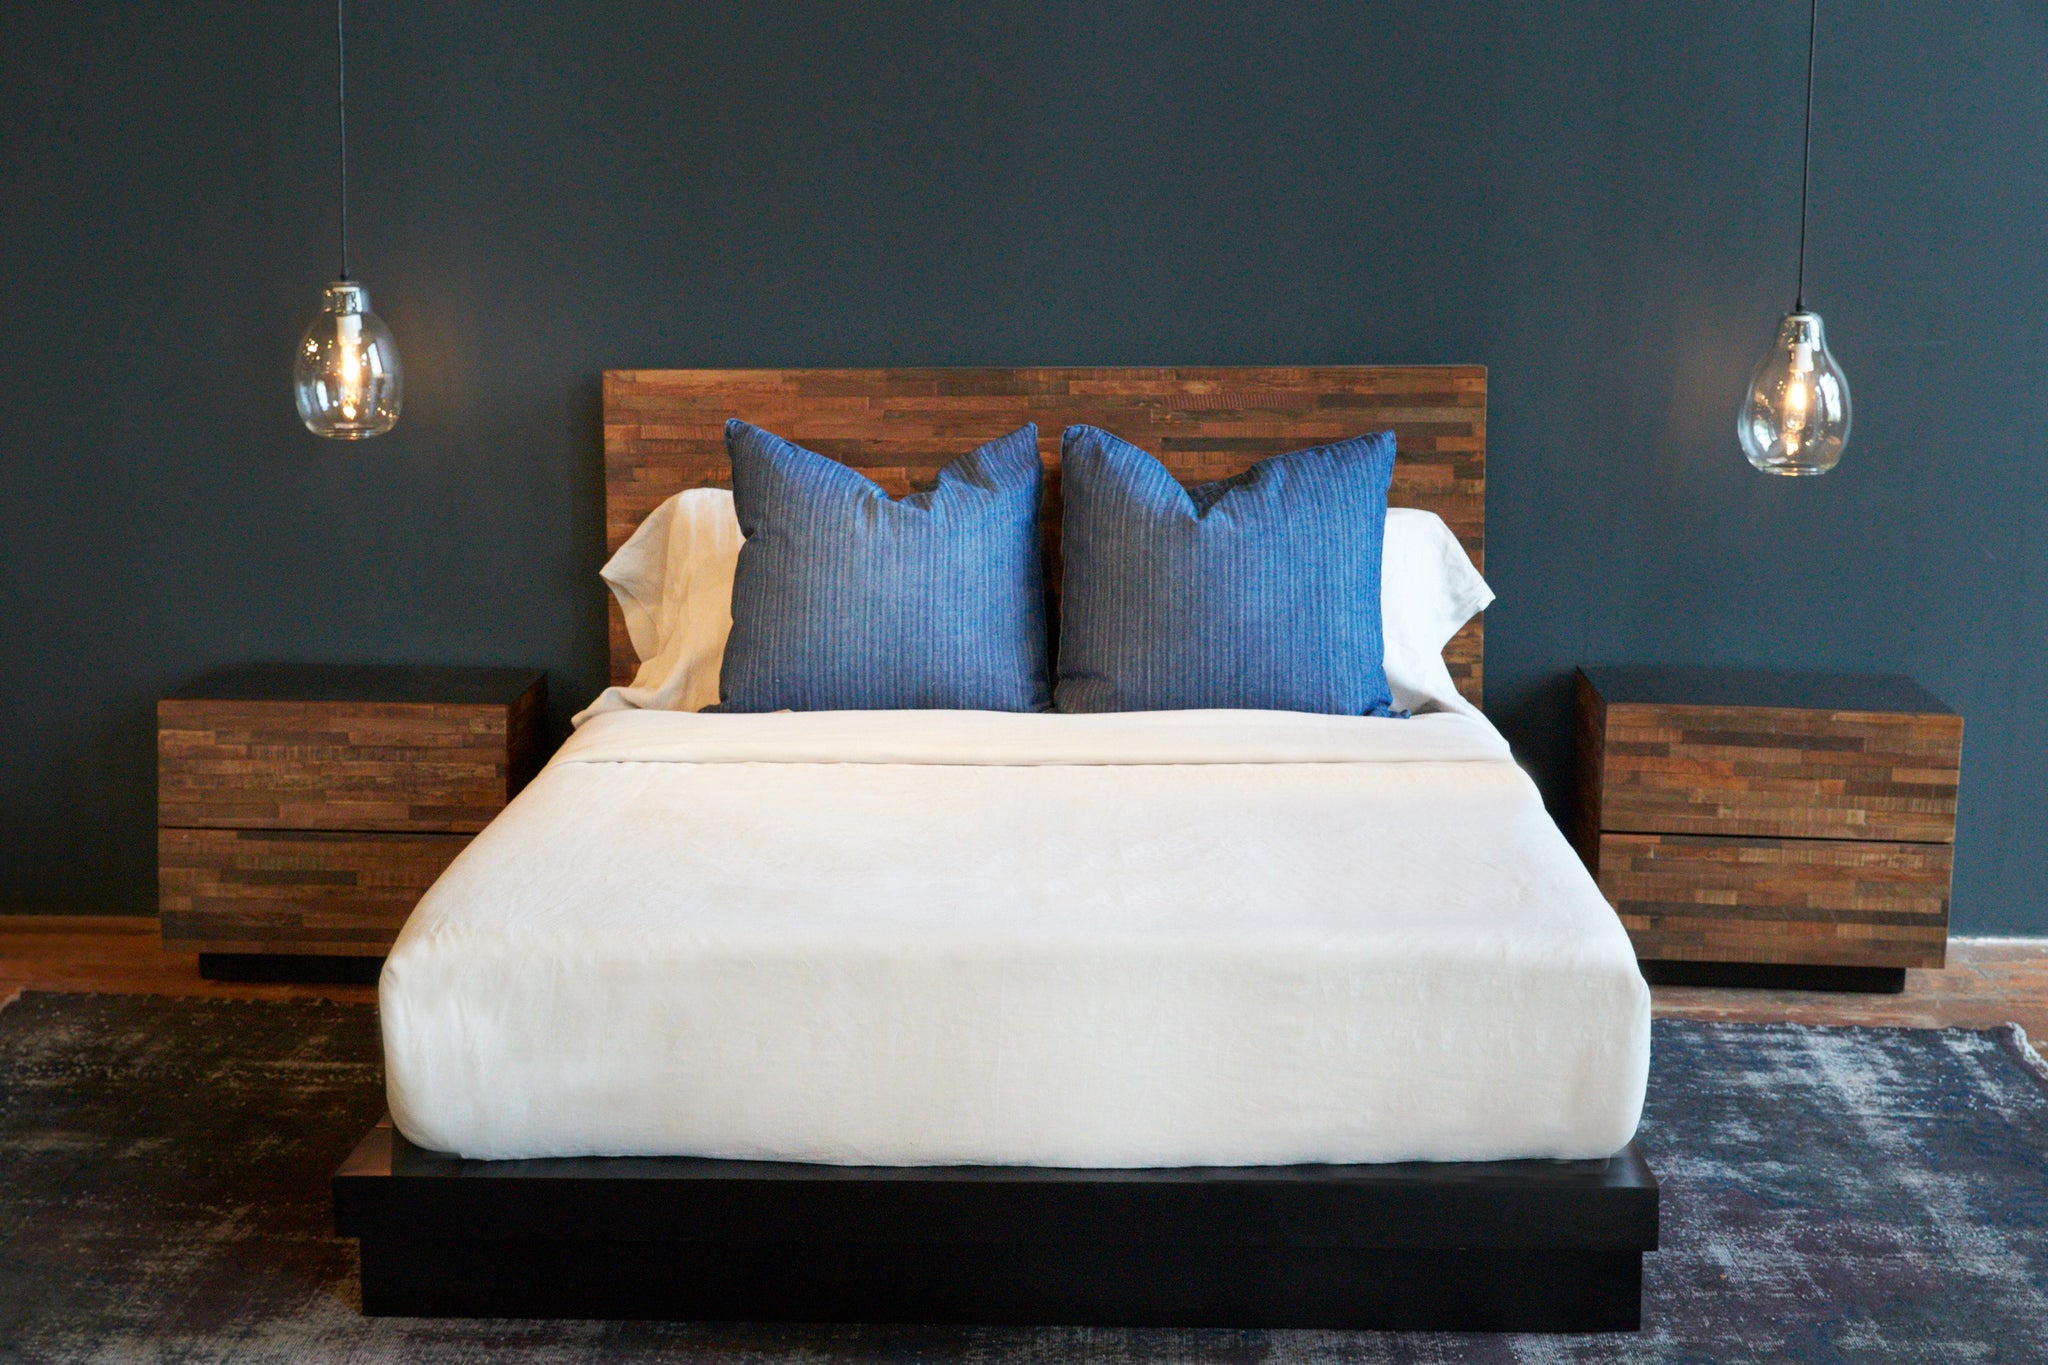  Bedroom setting. Wood platform bed  with white bedding and blue pillows with wood night stands against a blue wall and clear oval pendants hanging above each nightstand.  